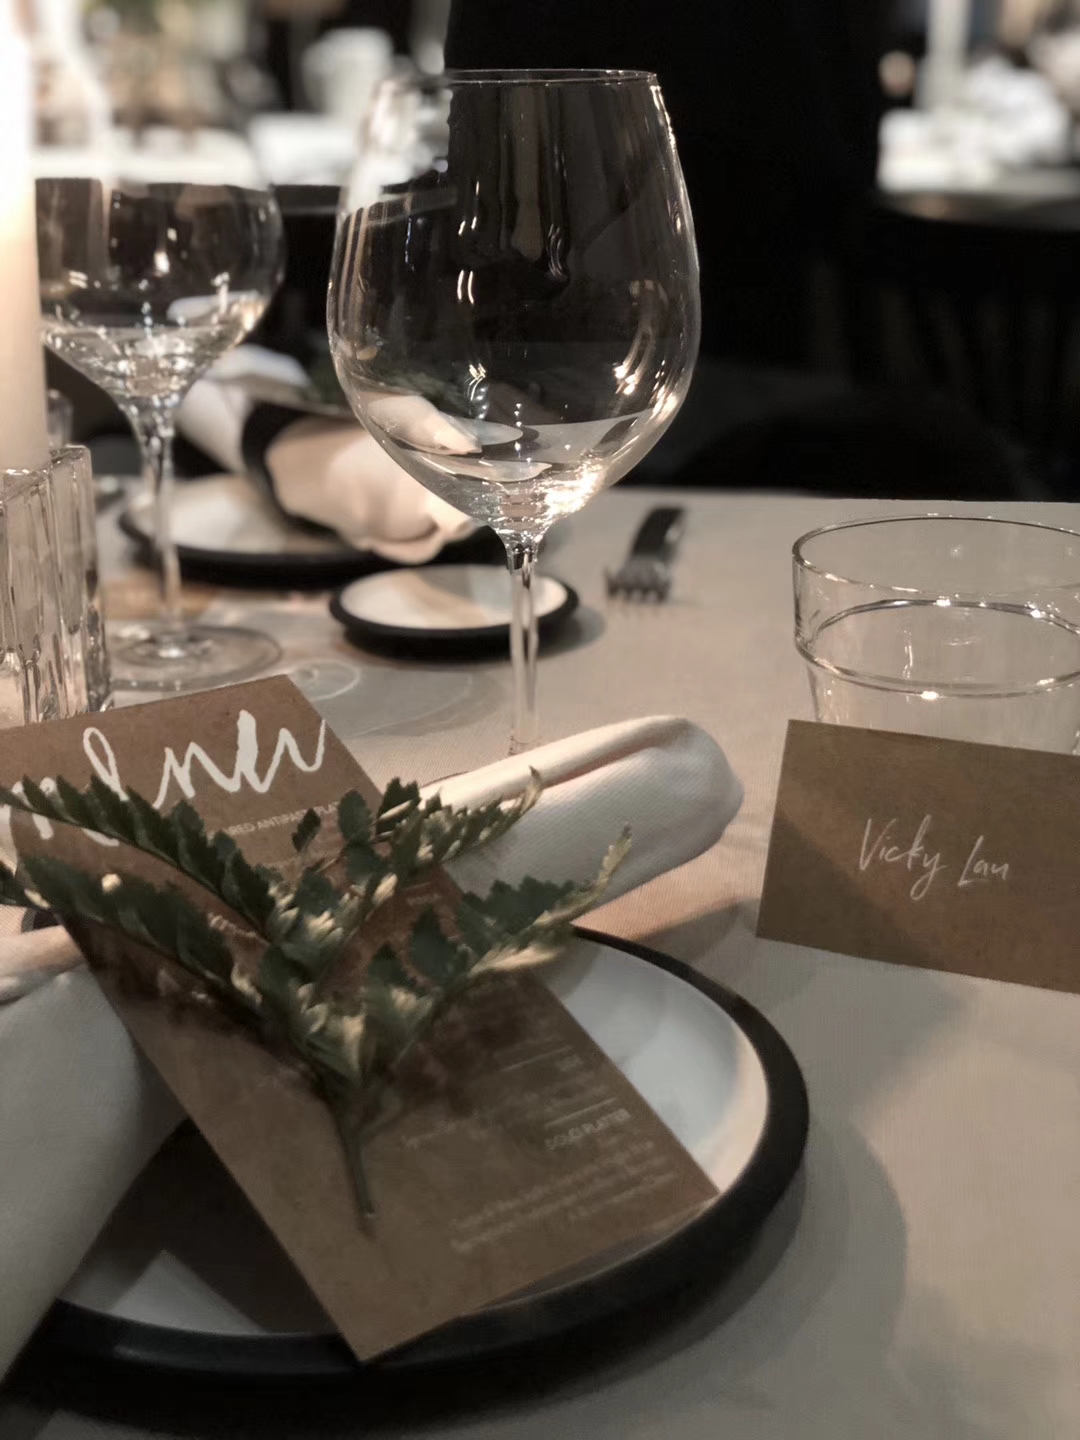 3rd element of a tablescape: glasses.